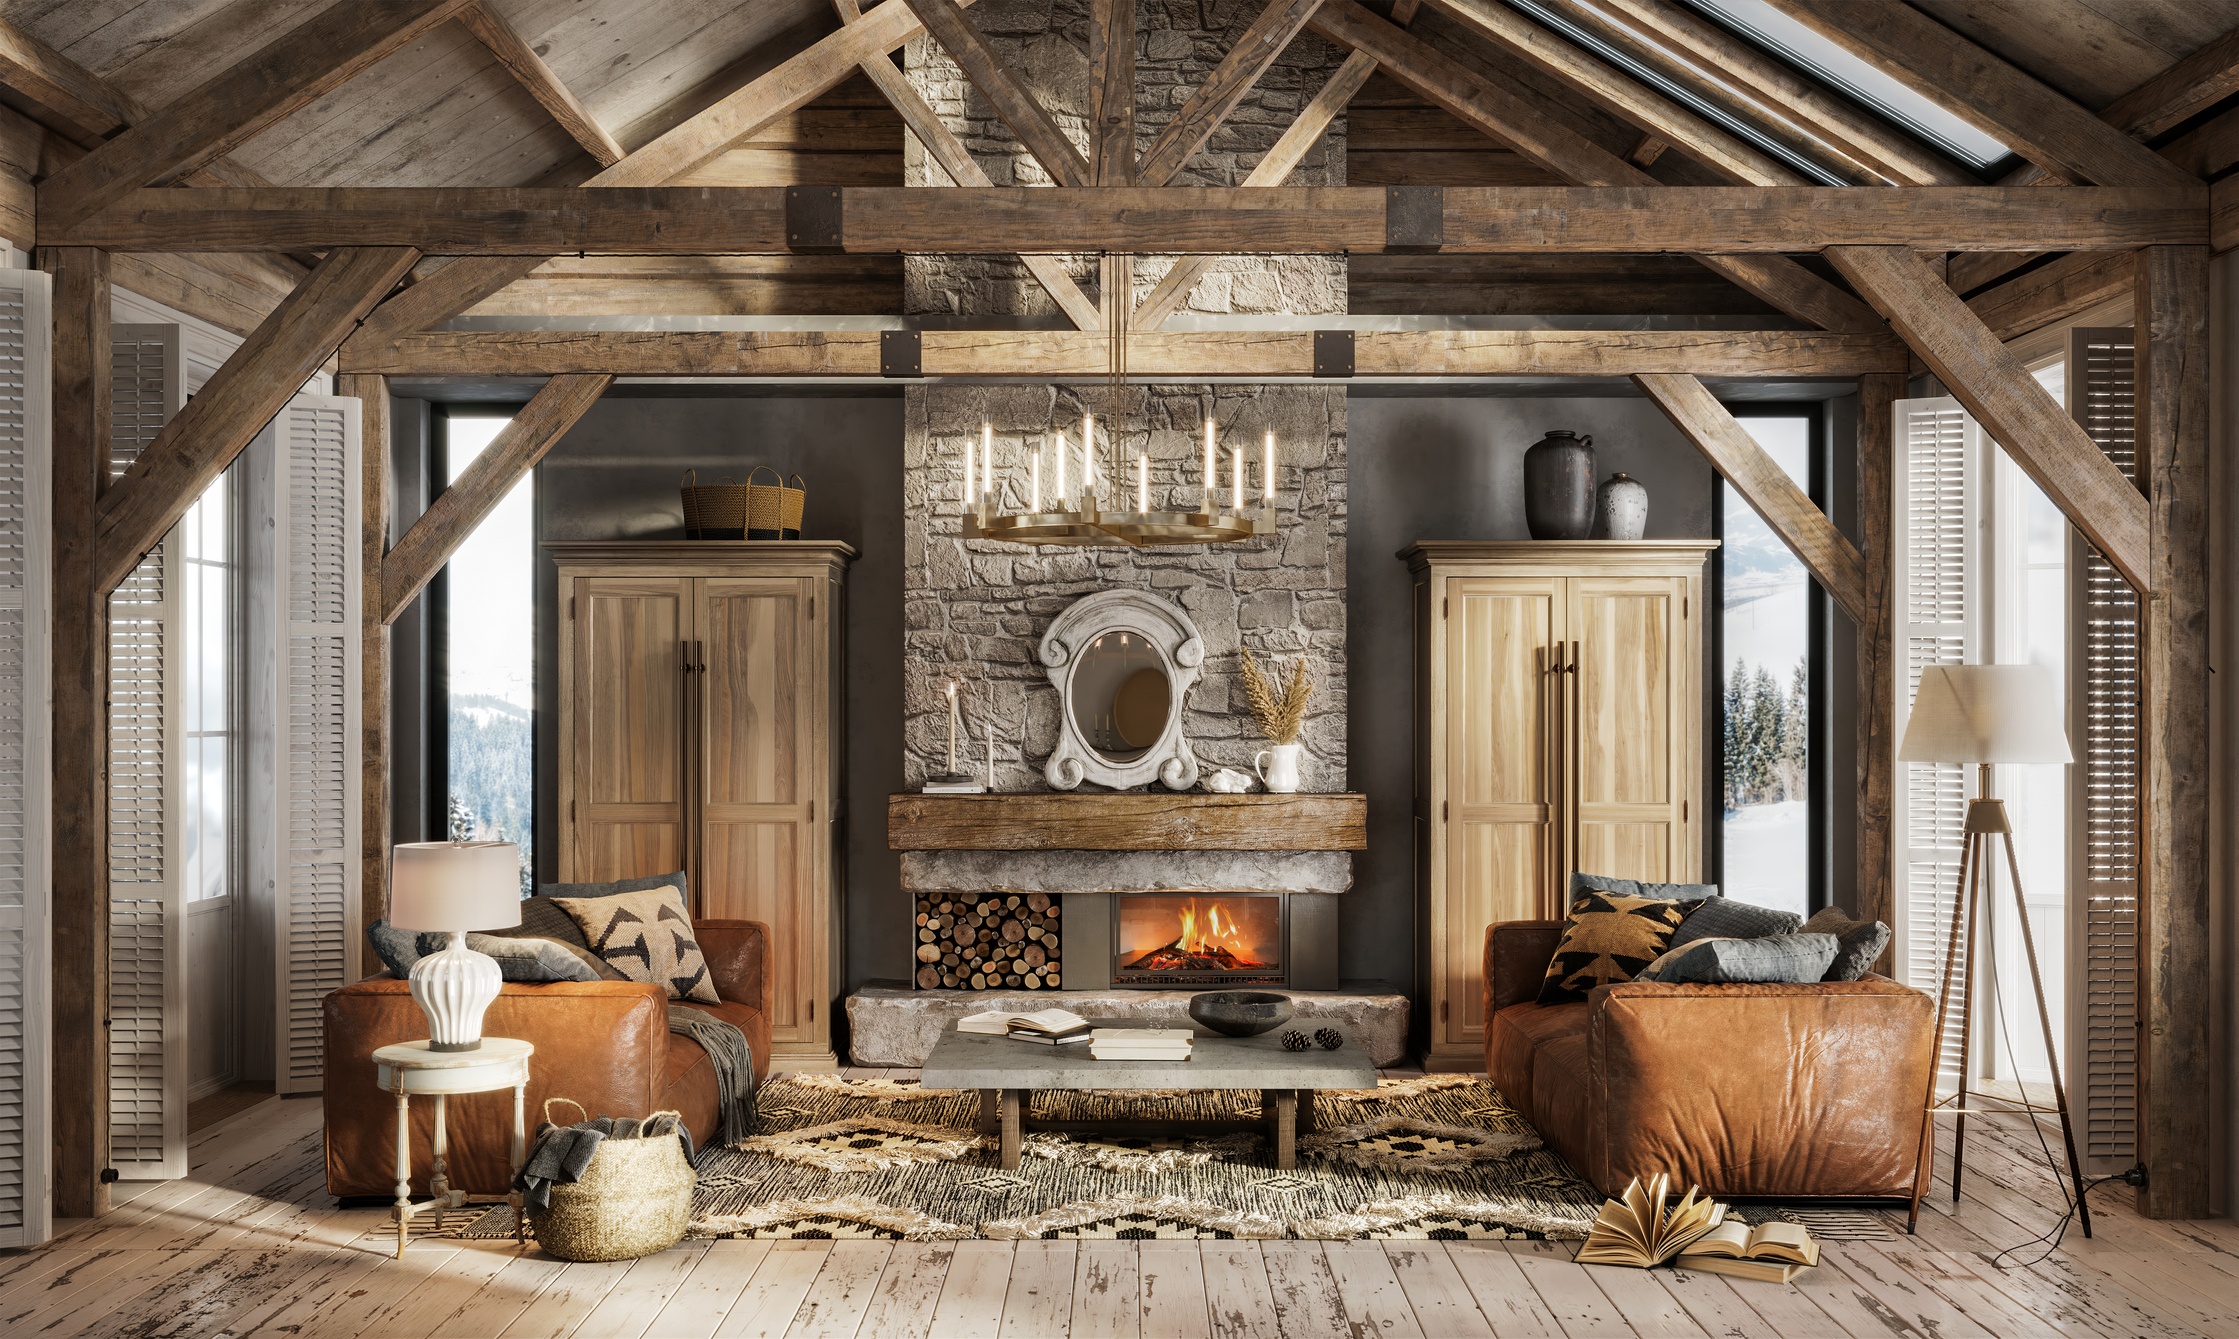 Featured image for “The 3 Most Popular Uses for an at-Home Log Cabin”